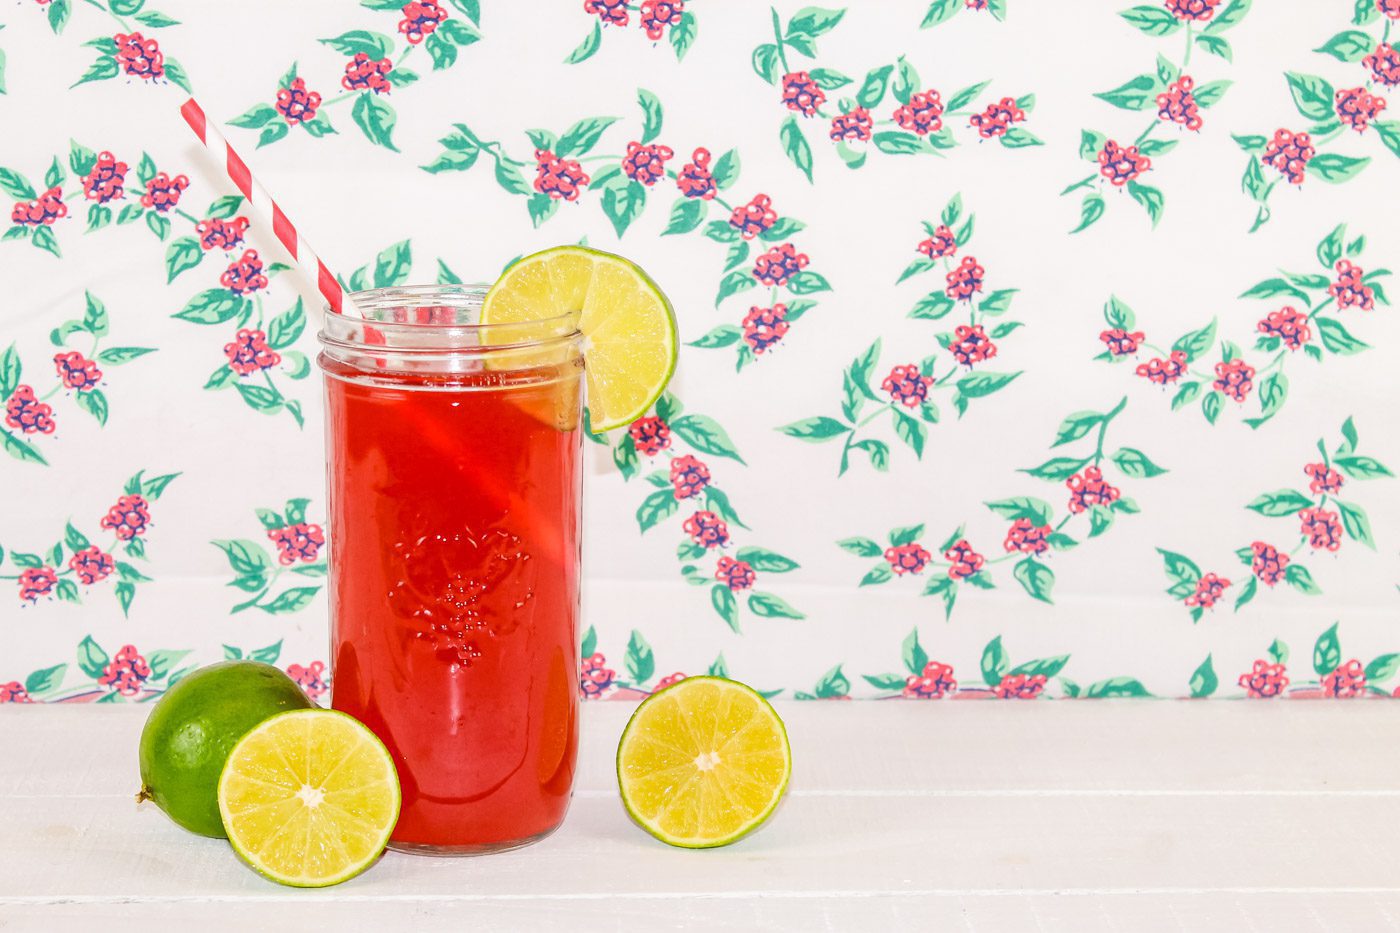 sitting in front of a floral tablecloth is a mason jar full of cherry limeade probiotic soda